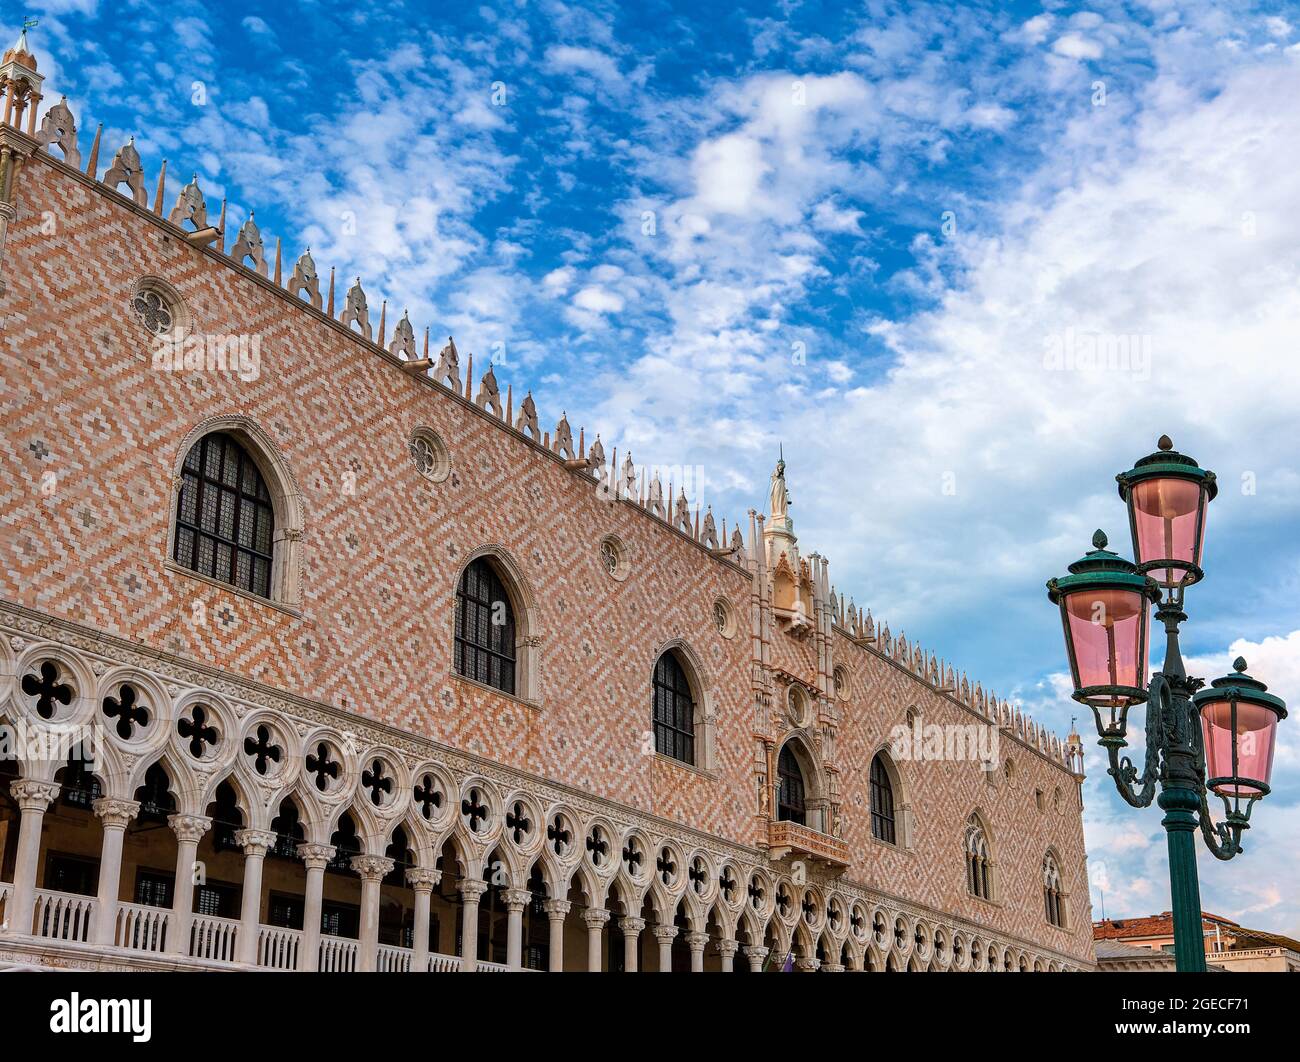 Venetian Doge's palace or Palazzo Ducale in Venice, Italy. Beautiful view of pink wall and arcade and clouds in blue sky. UNESCO World heritage city Stock Photo